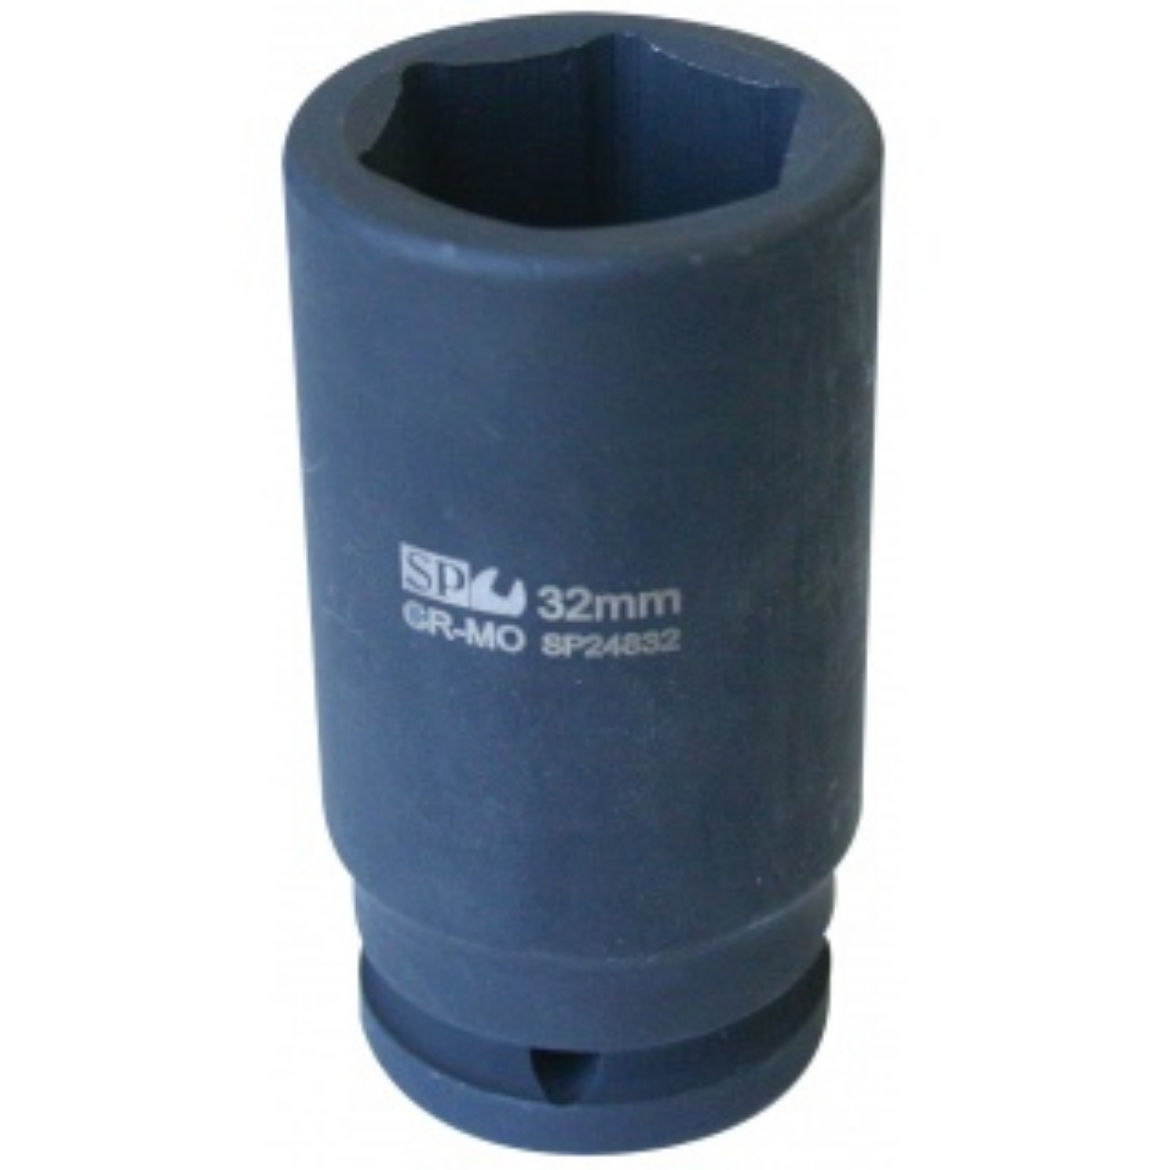 Picture of SOCKET IMPACT 3/4"DR 6PT DEEP METRIC 21MM SP TOOLS